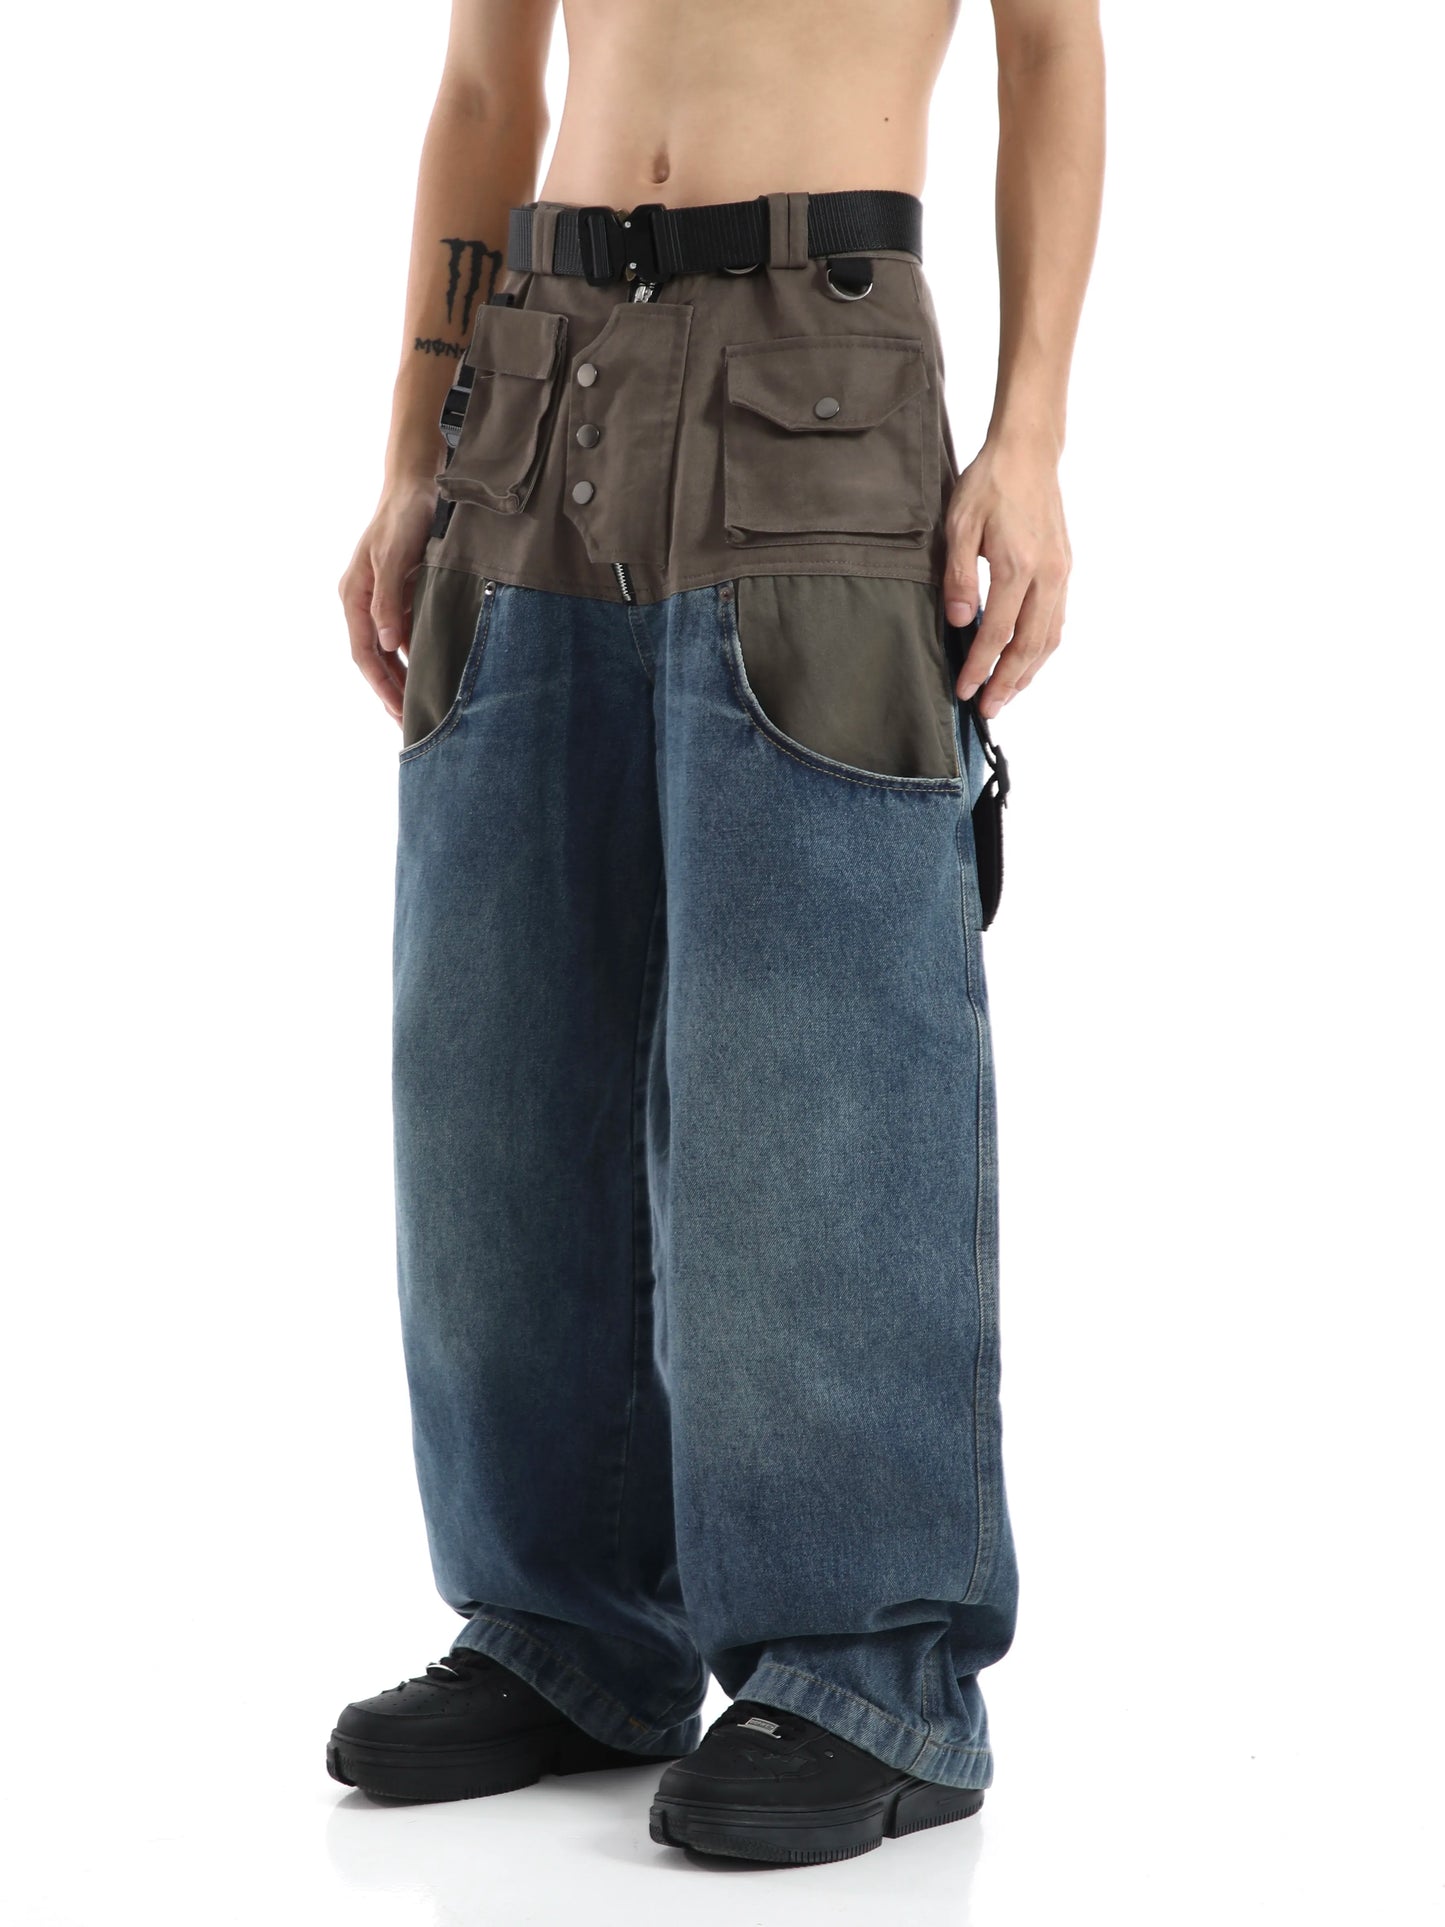 Oversize Japanese Workers Pants